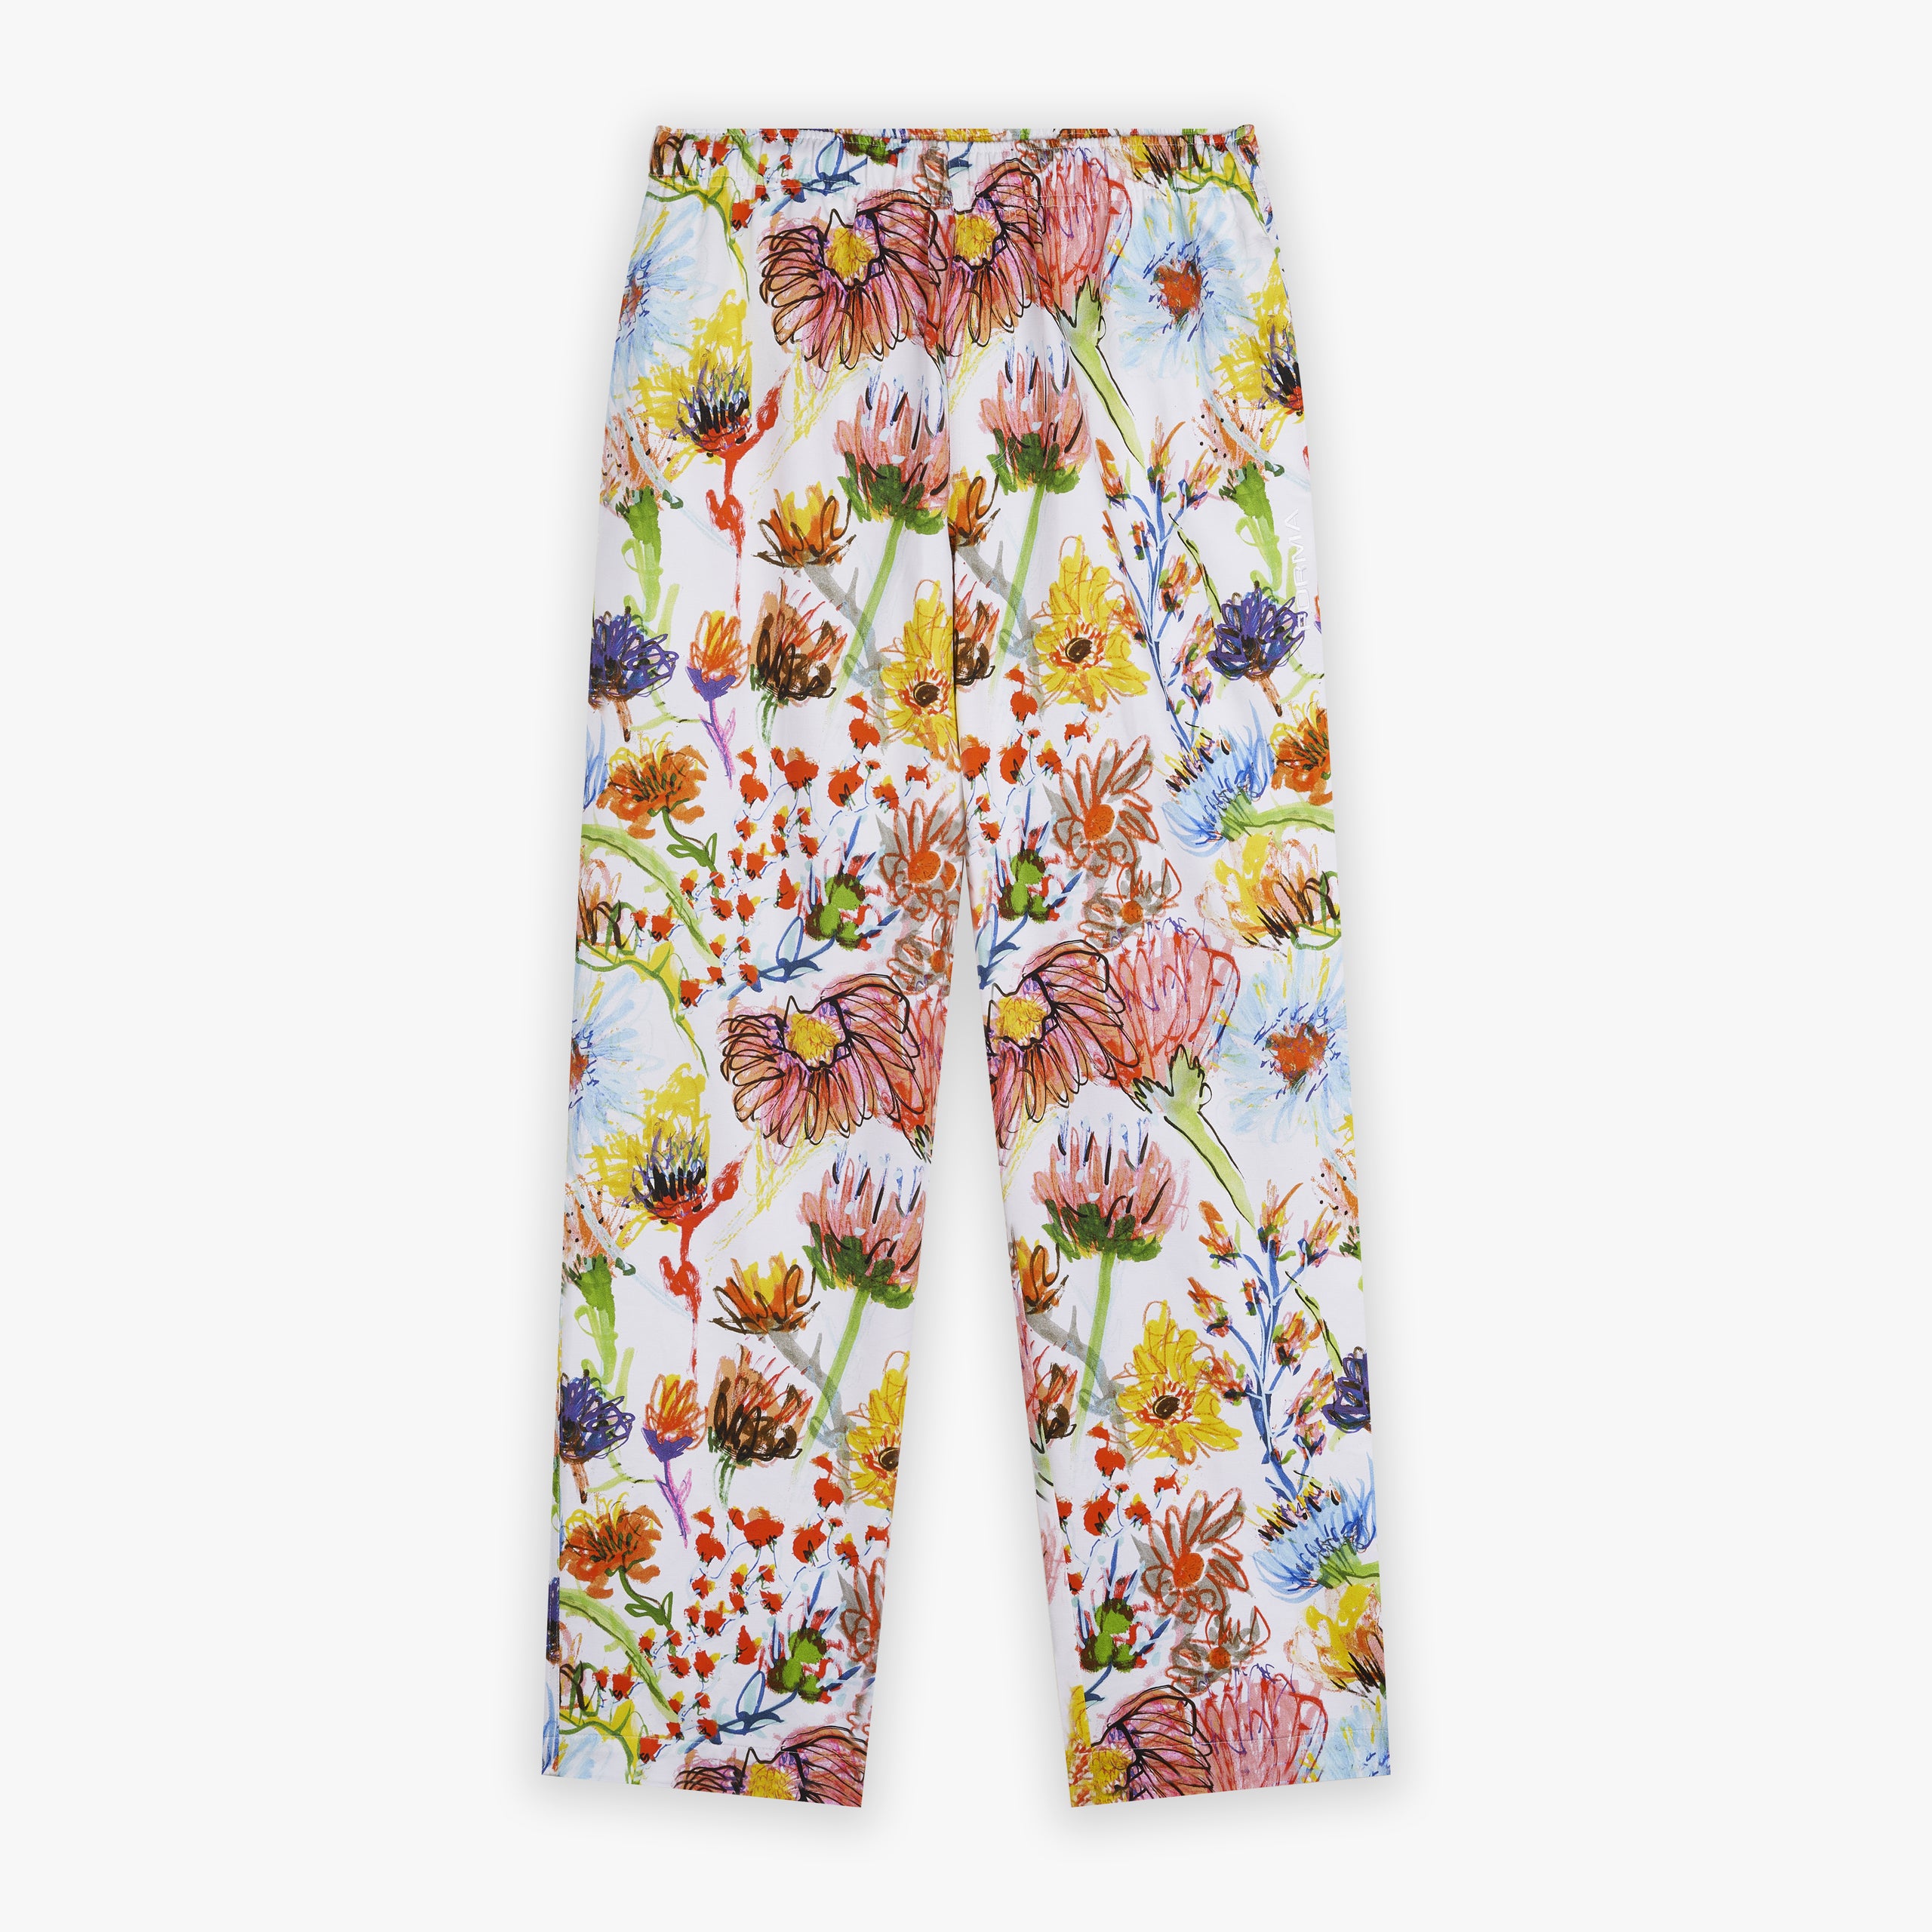 Forma relax pant florals